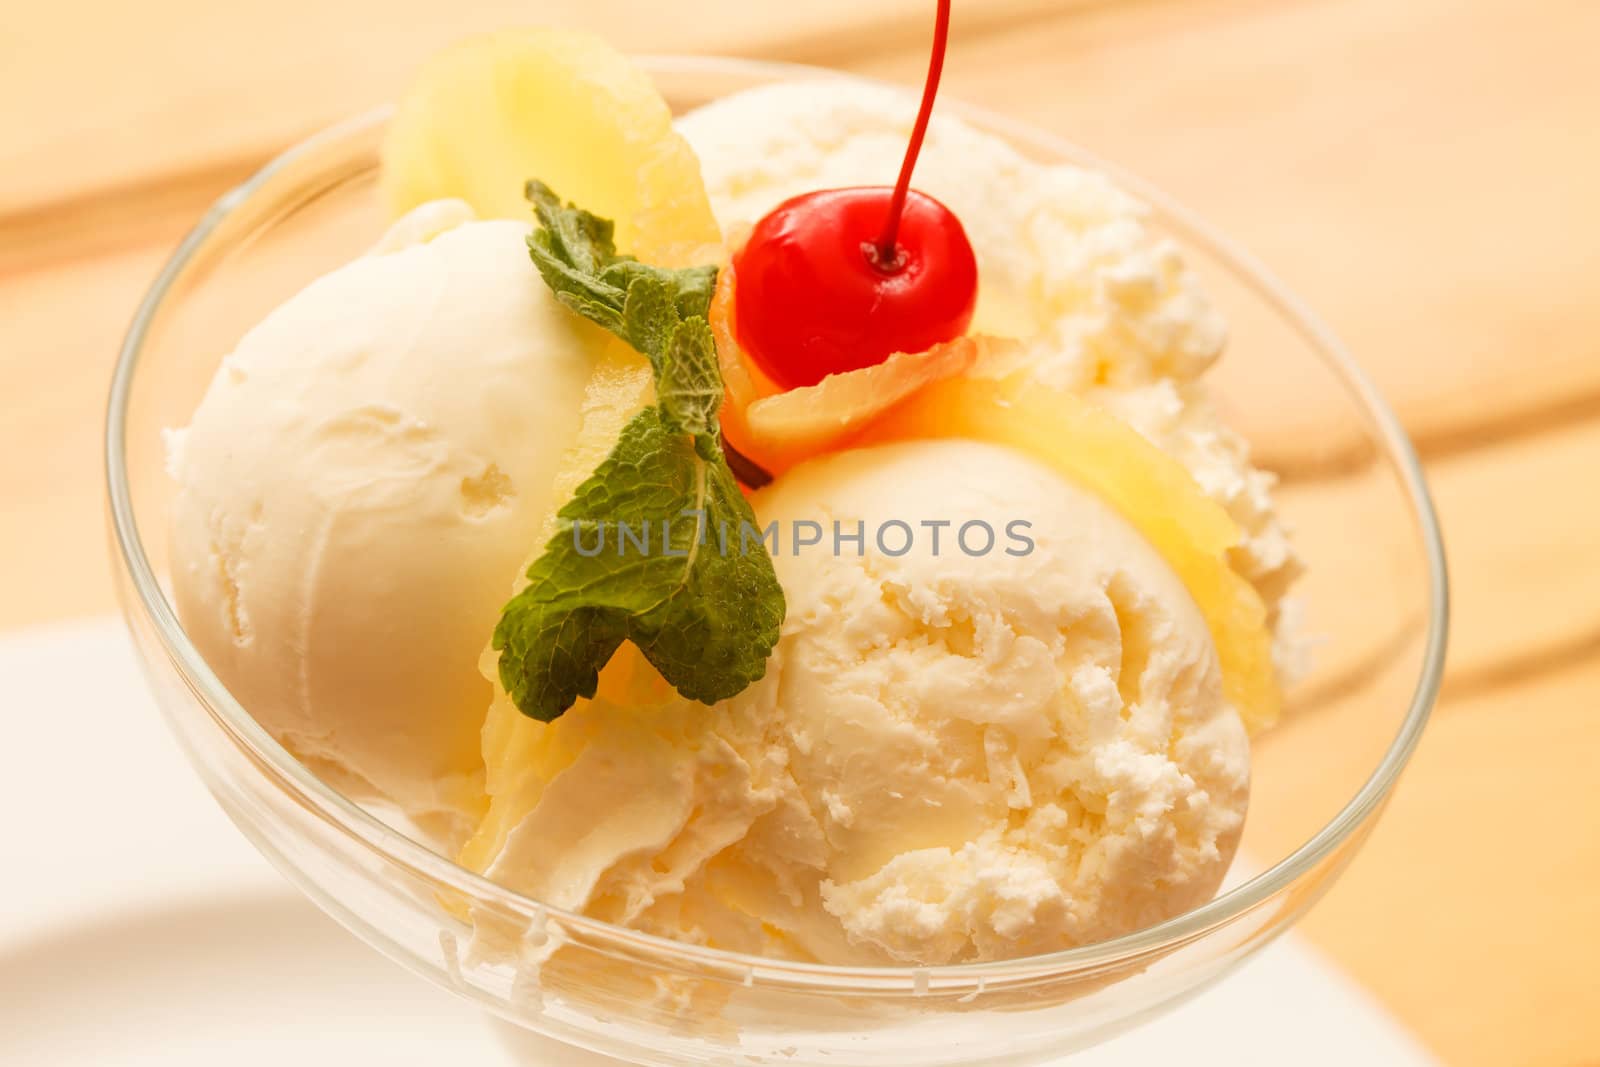 ice cream with fruits by shebeko